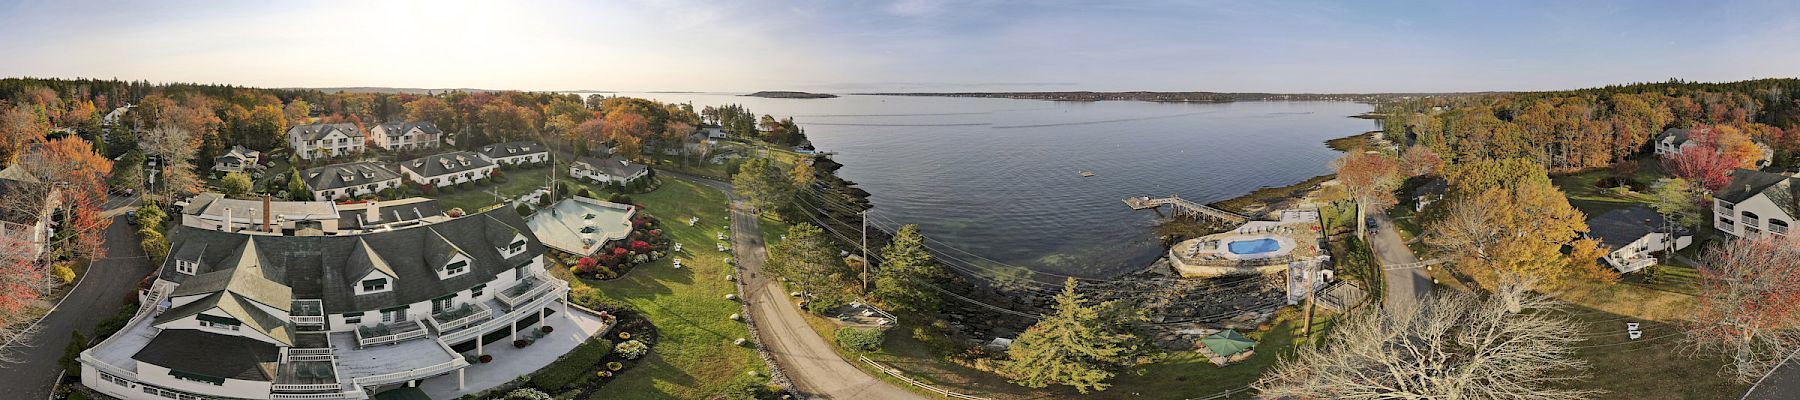 A panoramic view of a coastal resort featuring buildings, a swimming pool, trees with fall foliage, a body of water, and roads.